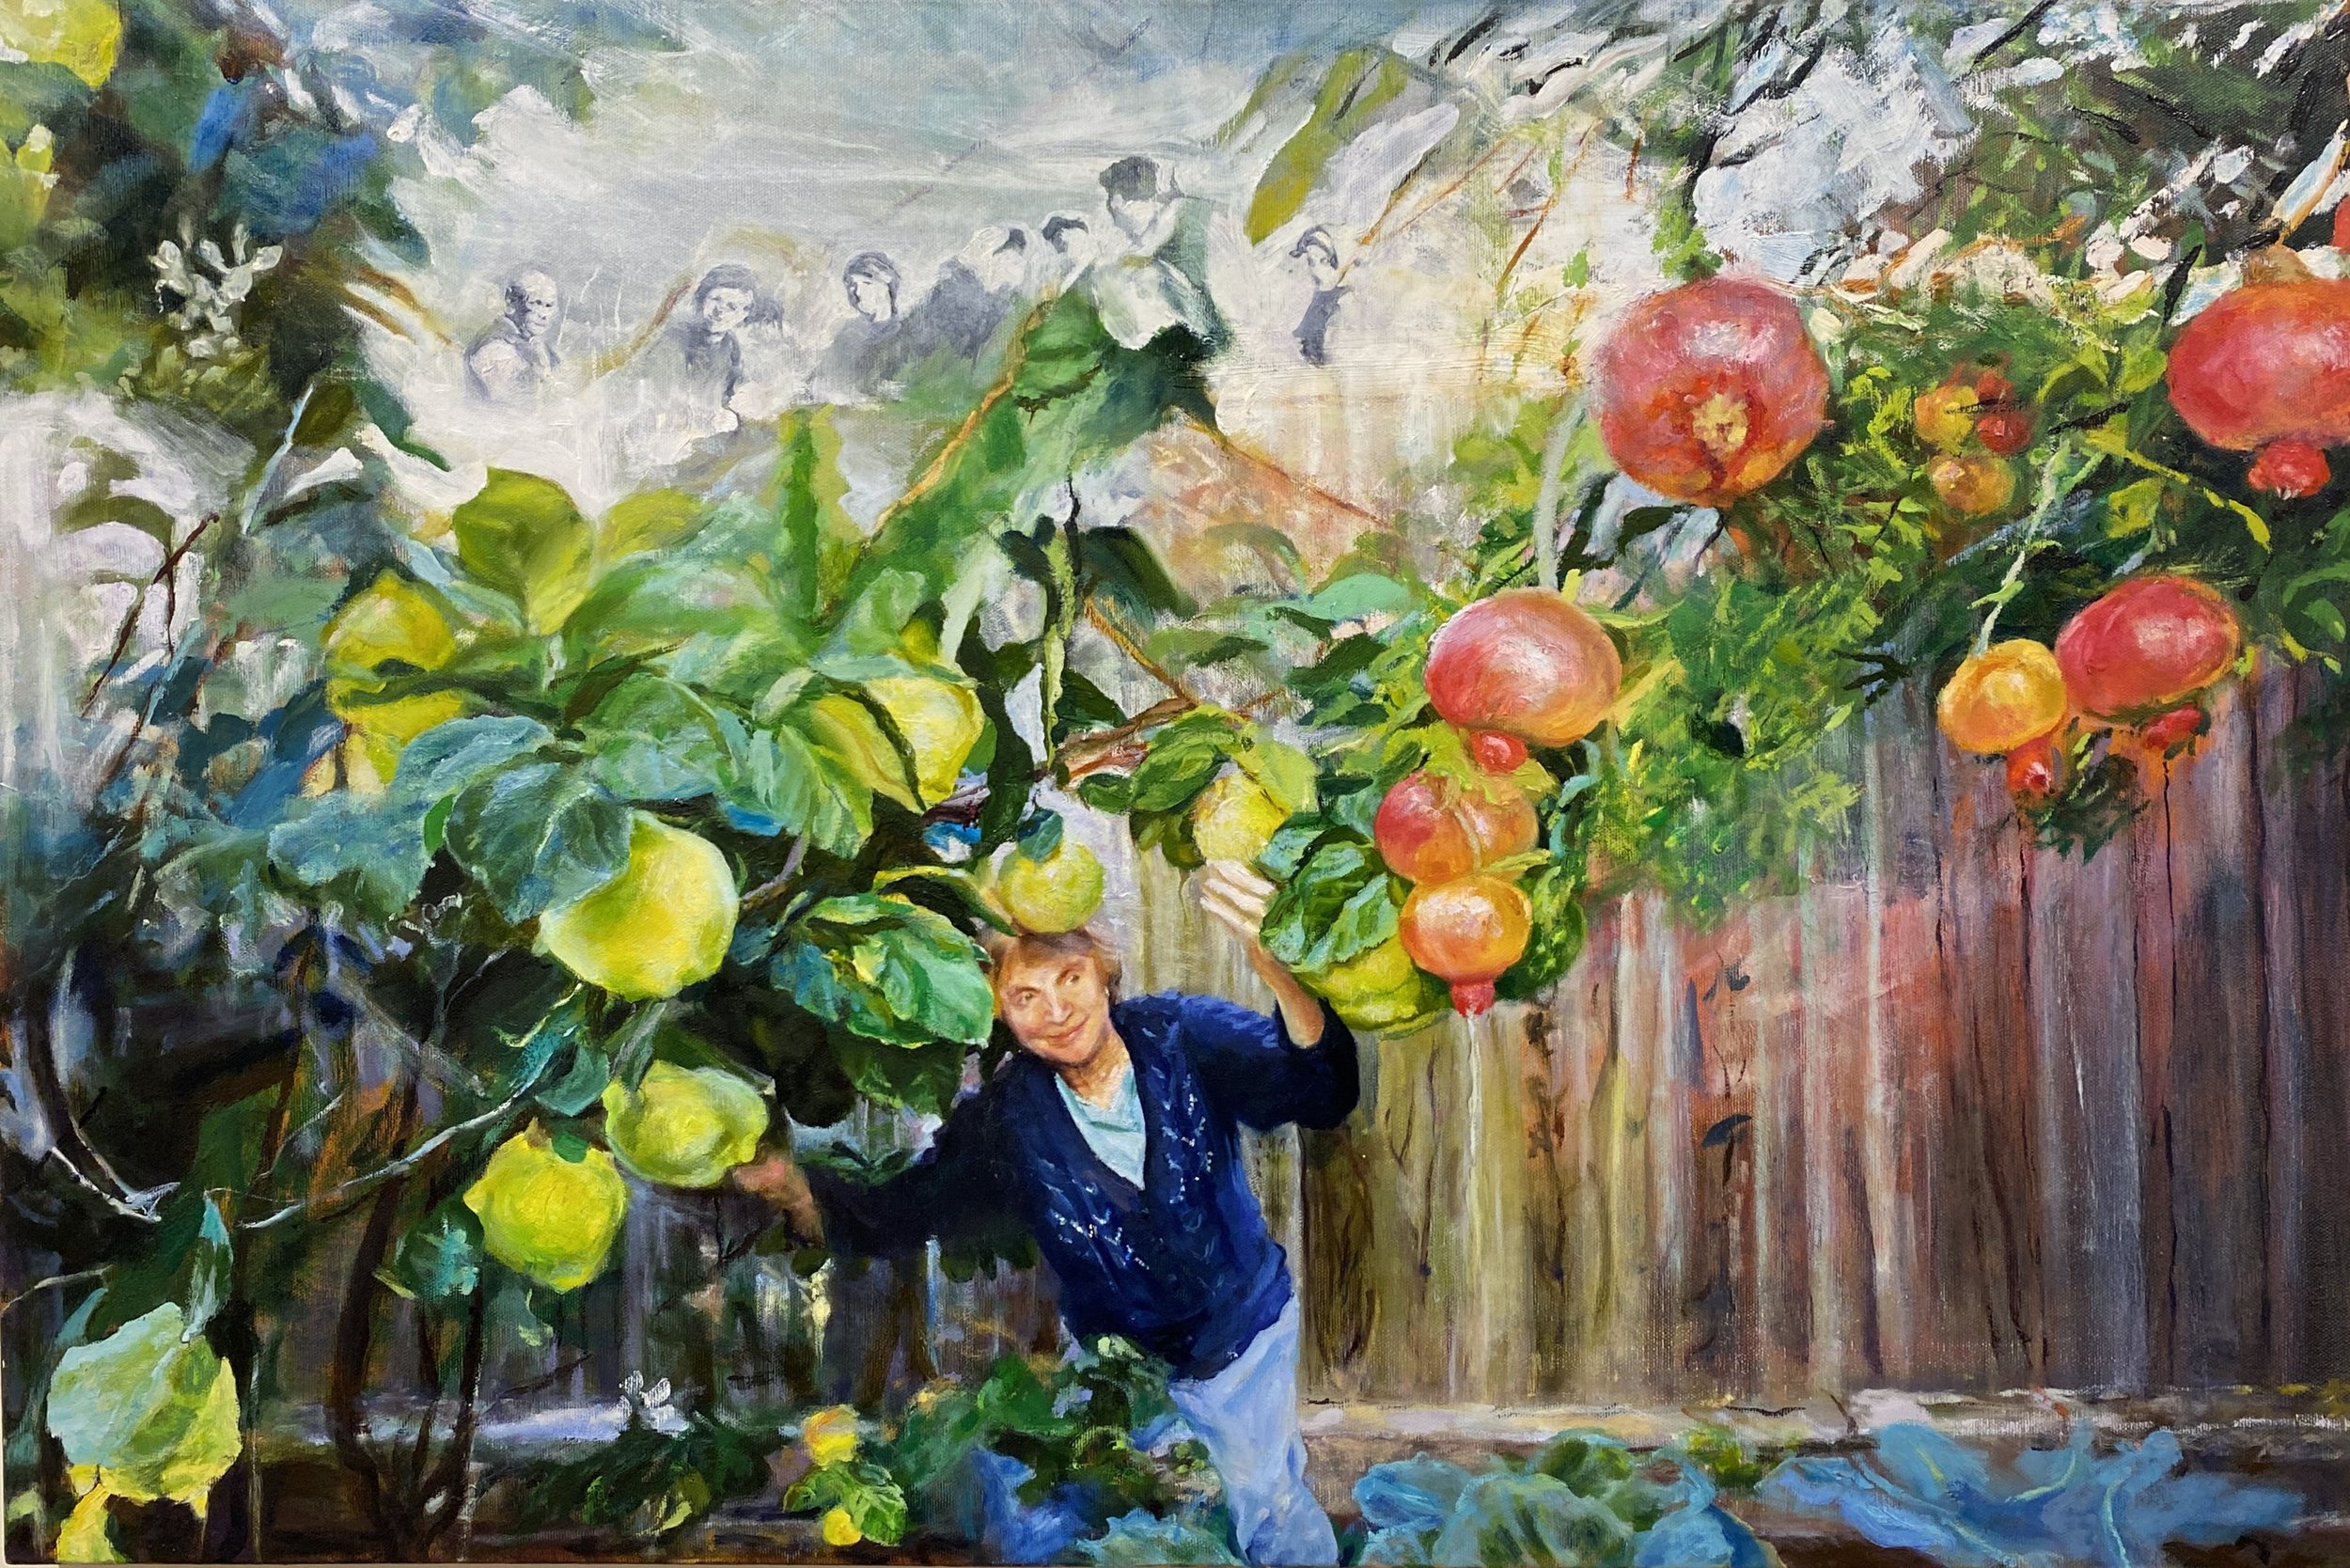 10. Backyard Memories and Fruit Trees | $1200 SOLD